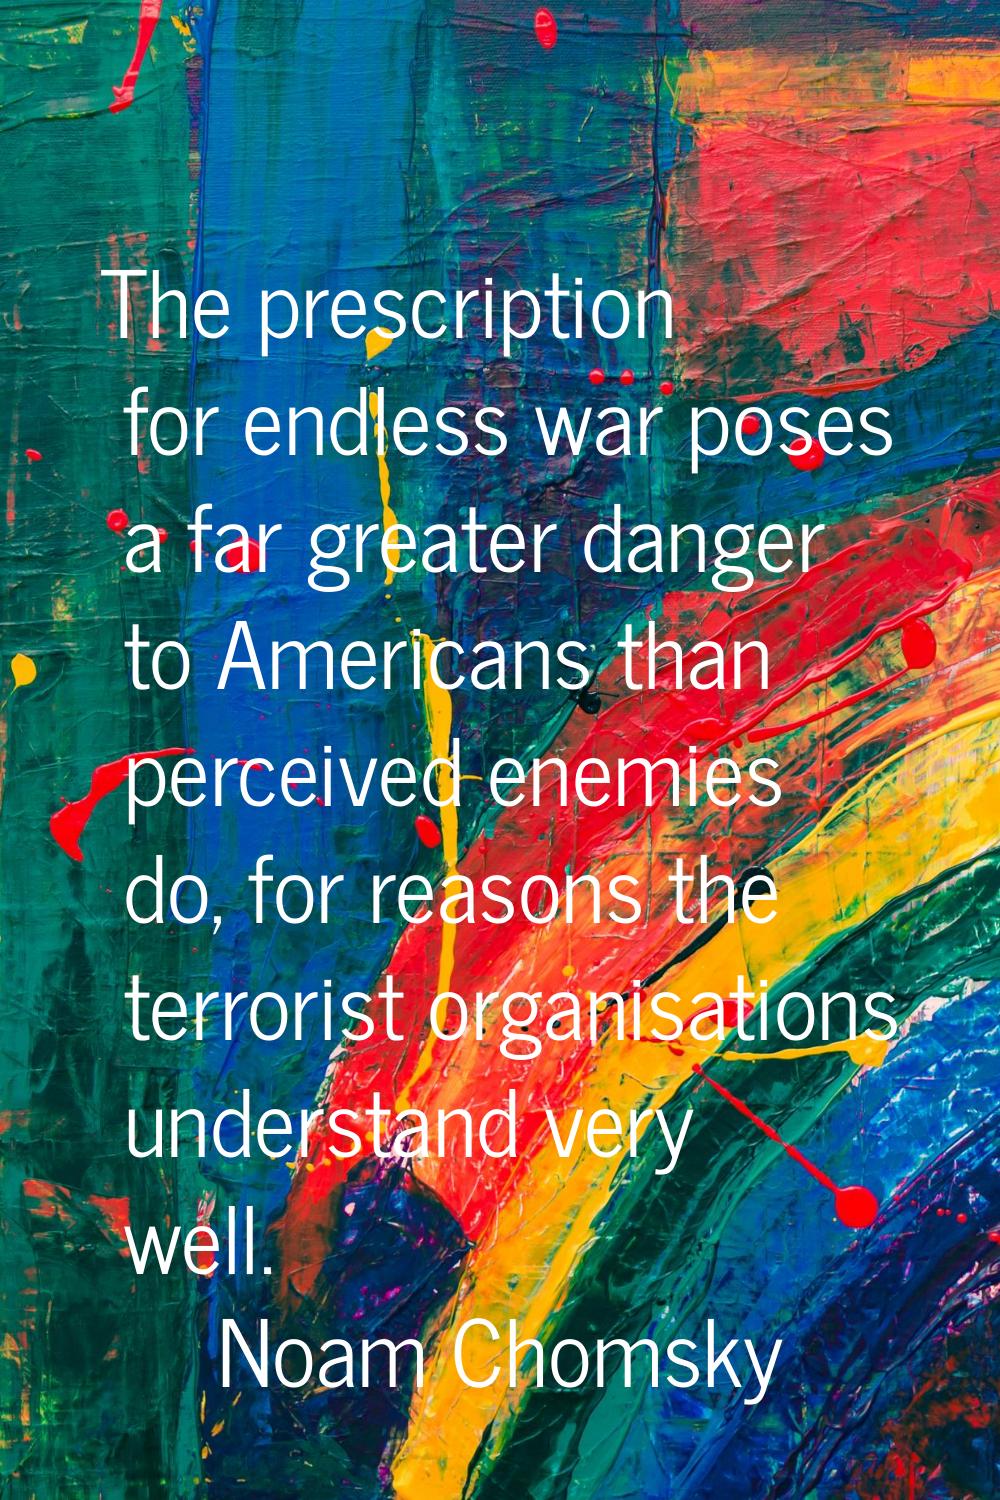 The prescription for endless war poses a far greater danger to Americans than perceived enemies do,